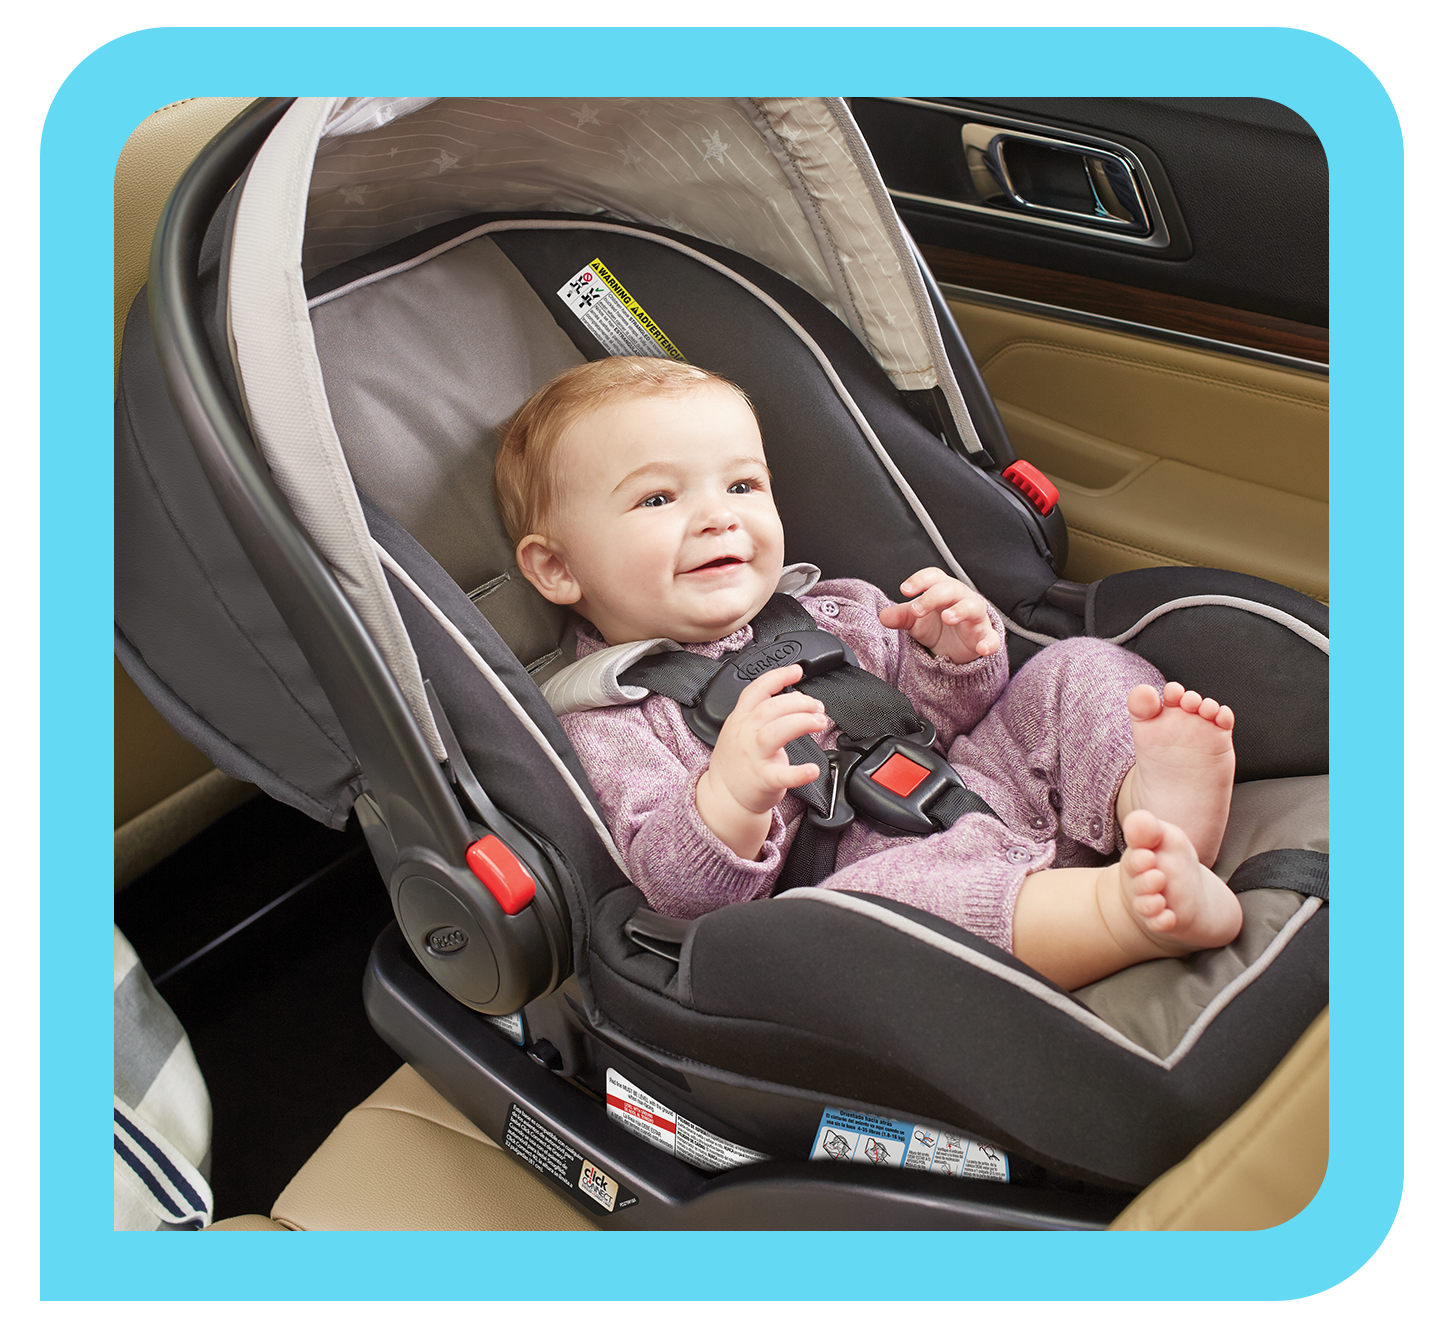 Graco S Car Seat Safety Standards